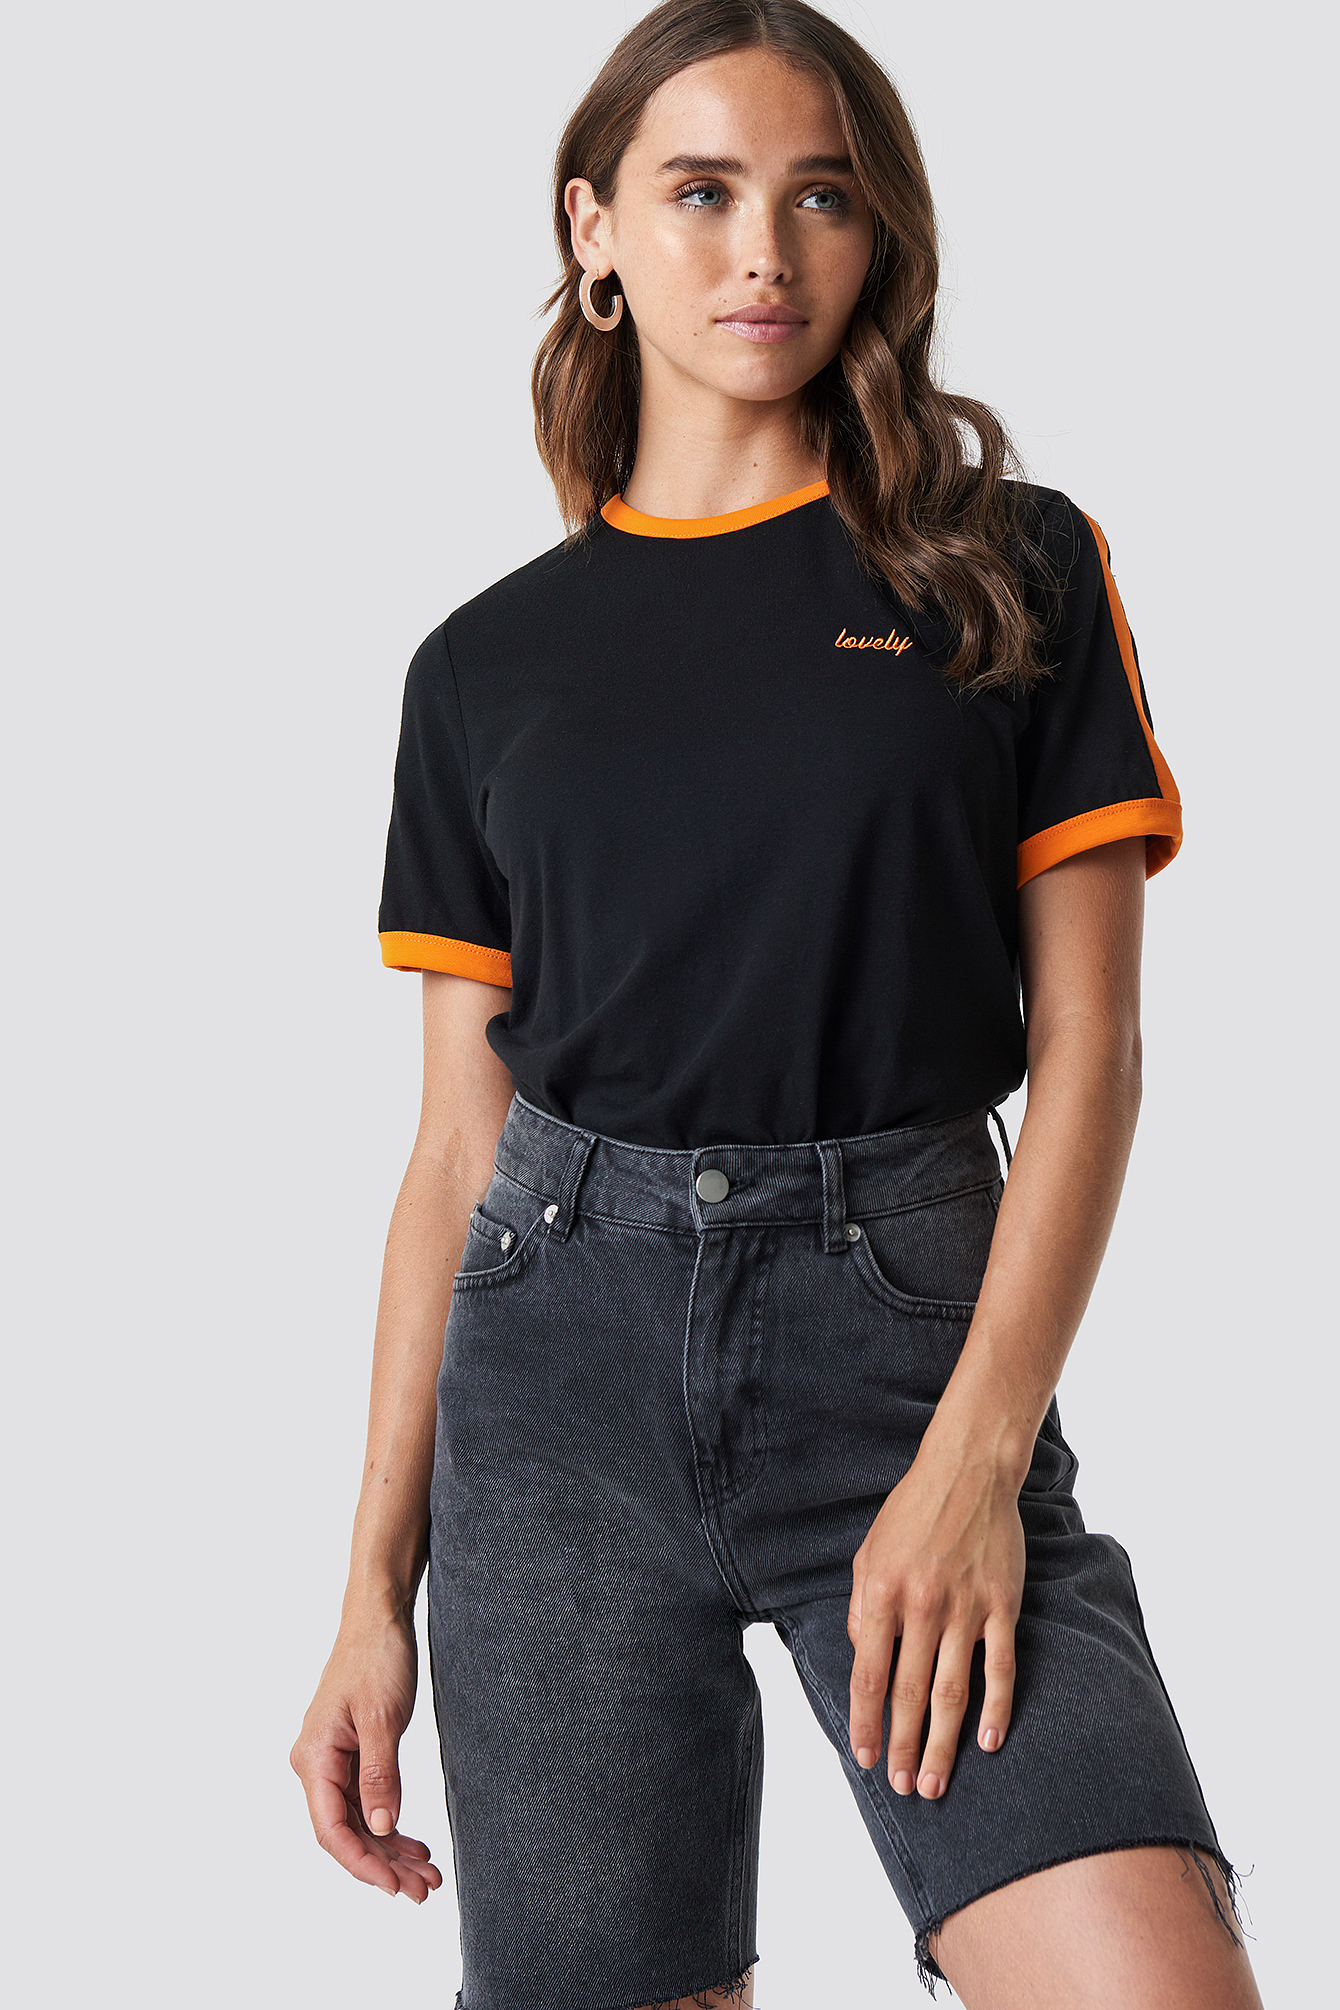 Black NA-KD Lovely Embroidery Tee